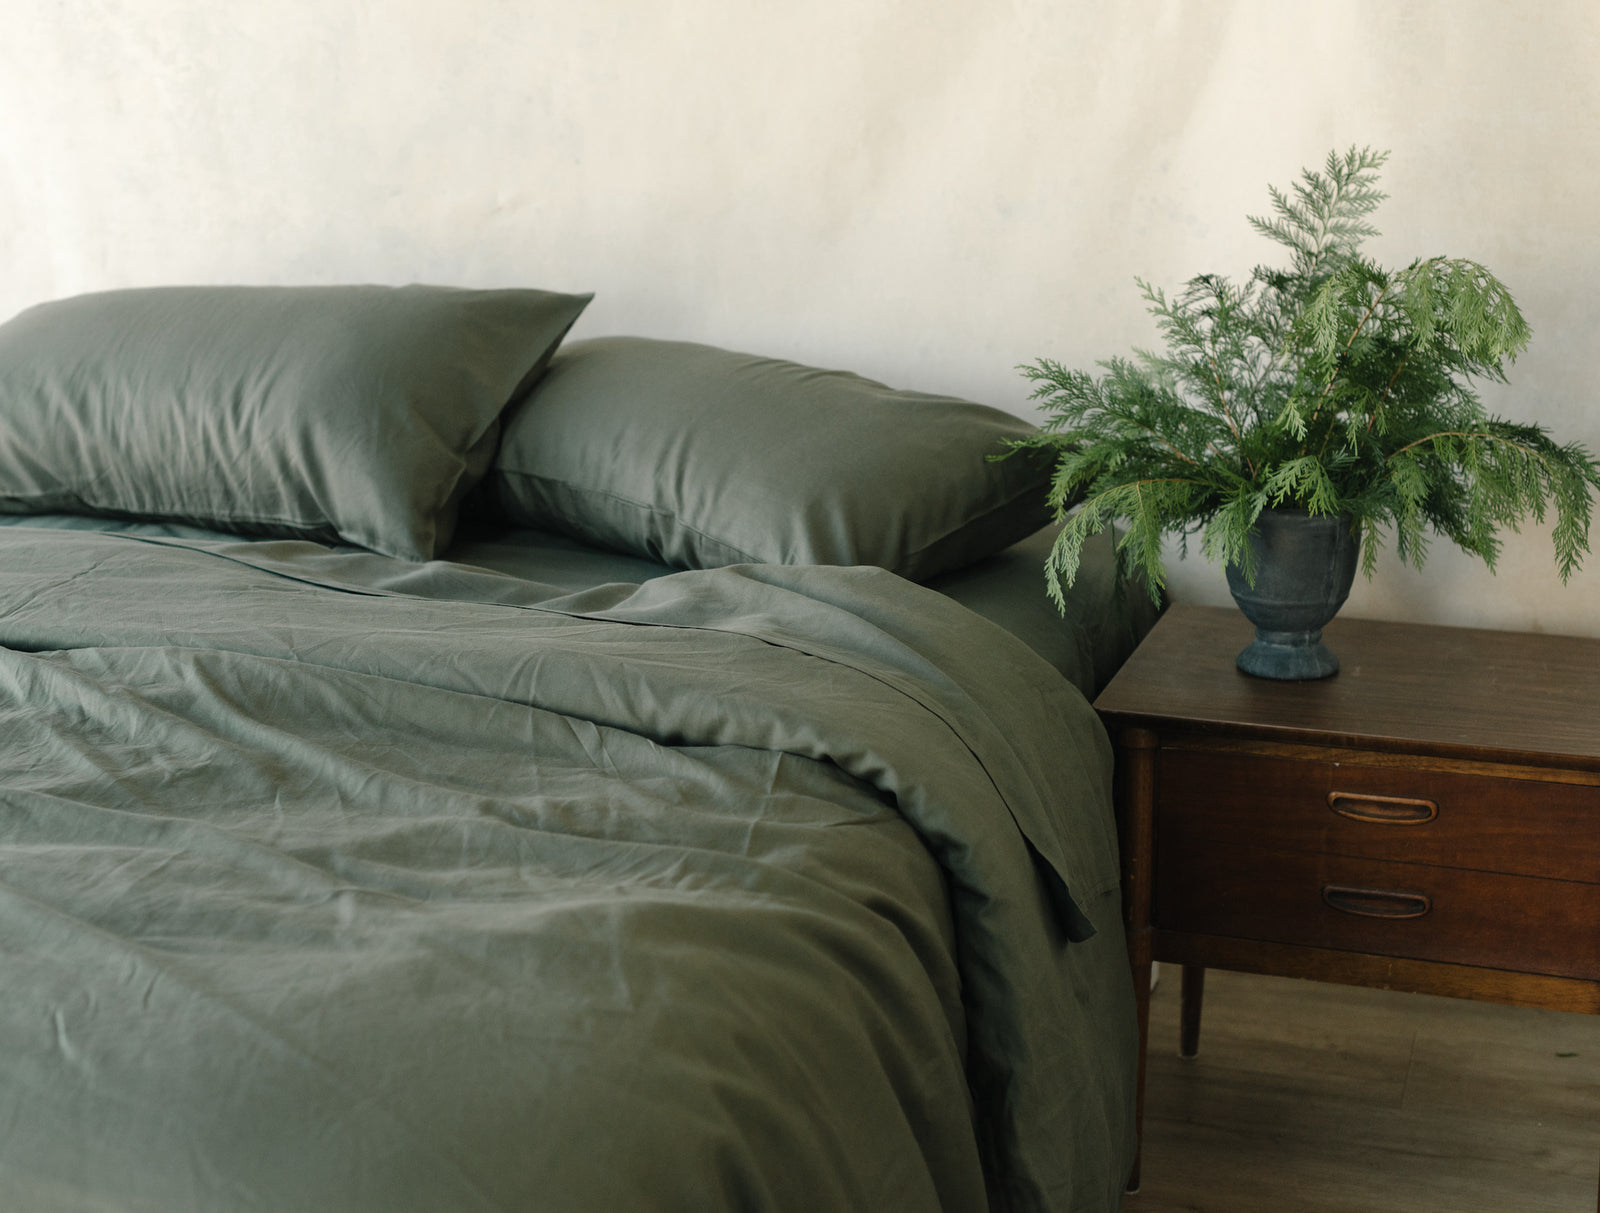 Olive Duvet Cover and comforter resting on a bed. 